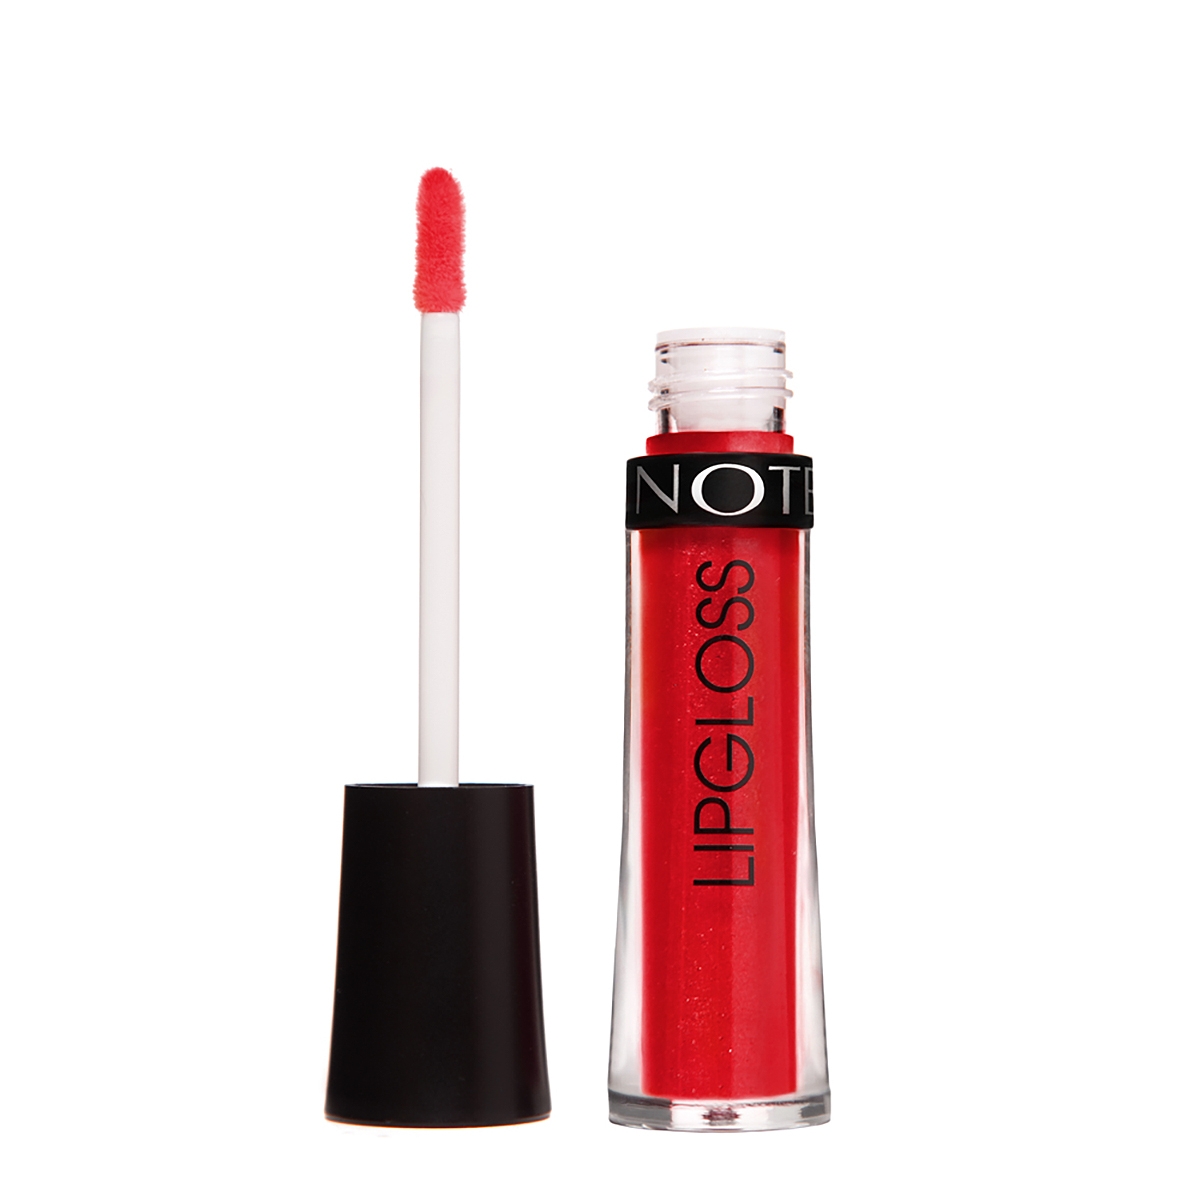 NOTE | Delicious Red Lip Gloss 1